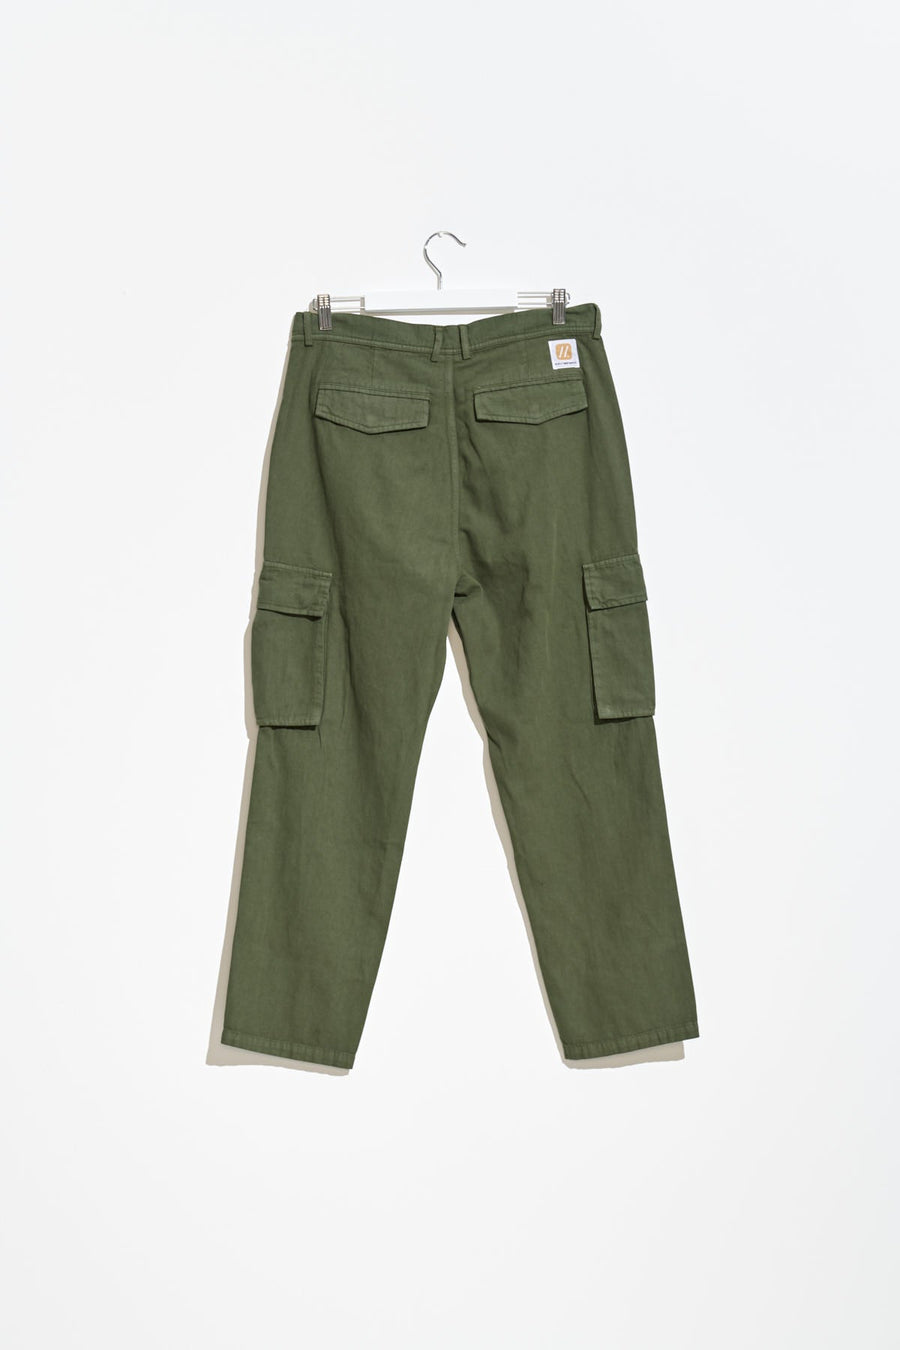 MISFIT GREEN ONIONS CARGO PANT - ARMY GREEN - WILD ROSE